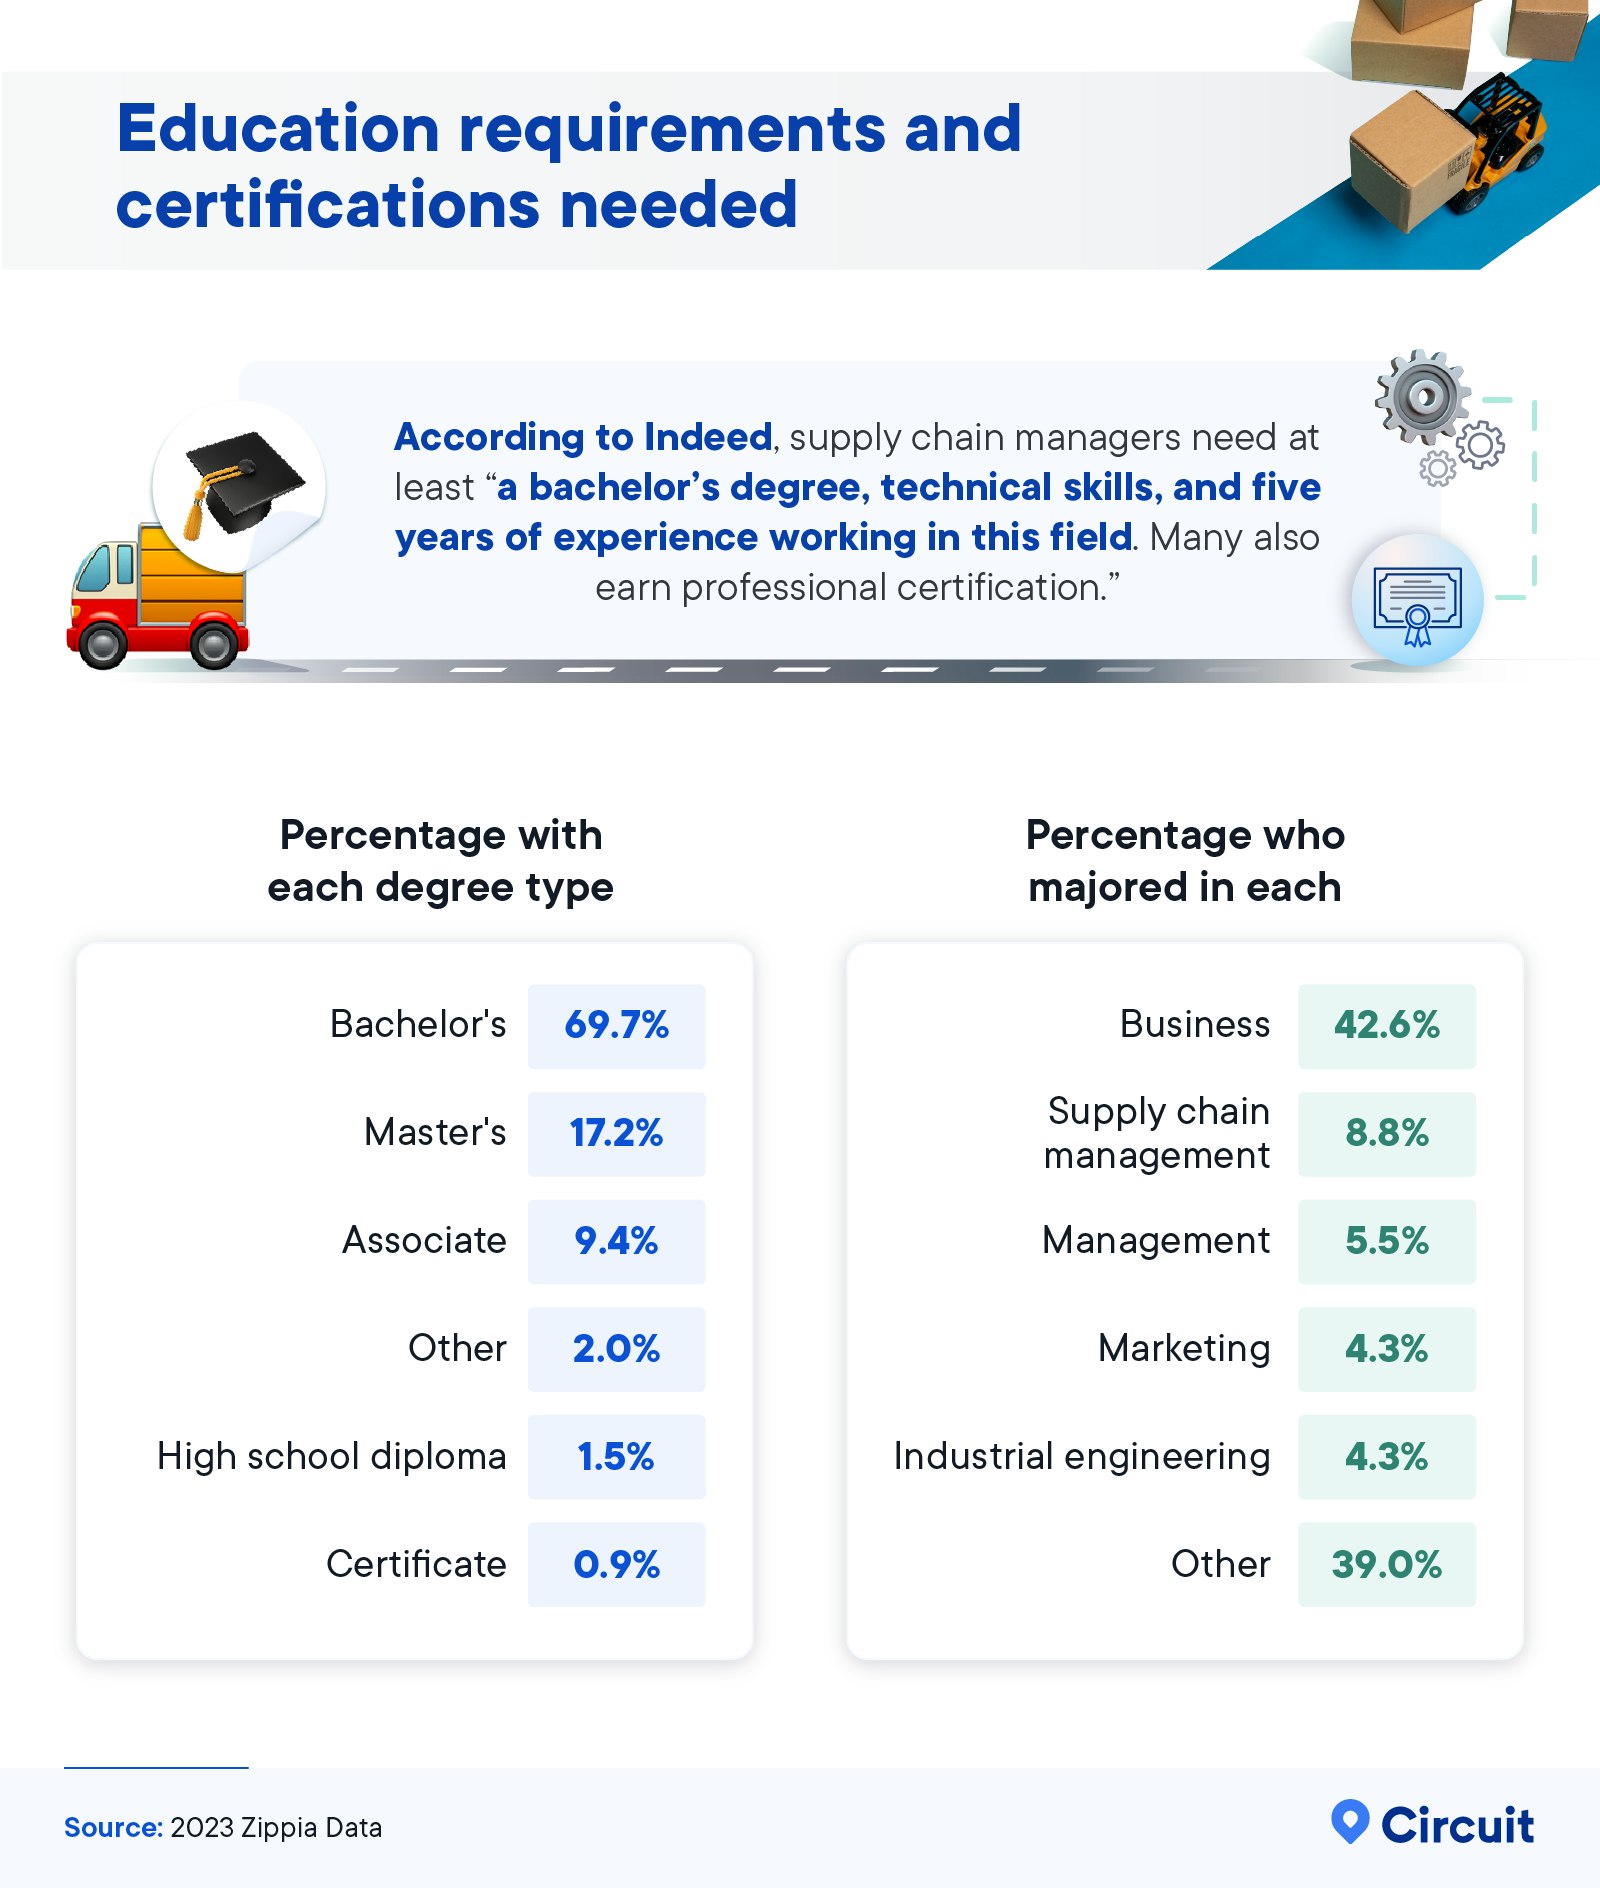 Education requirements and certifications needed